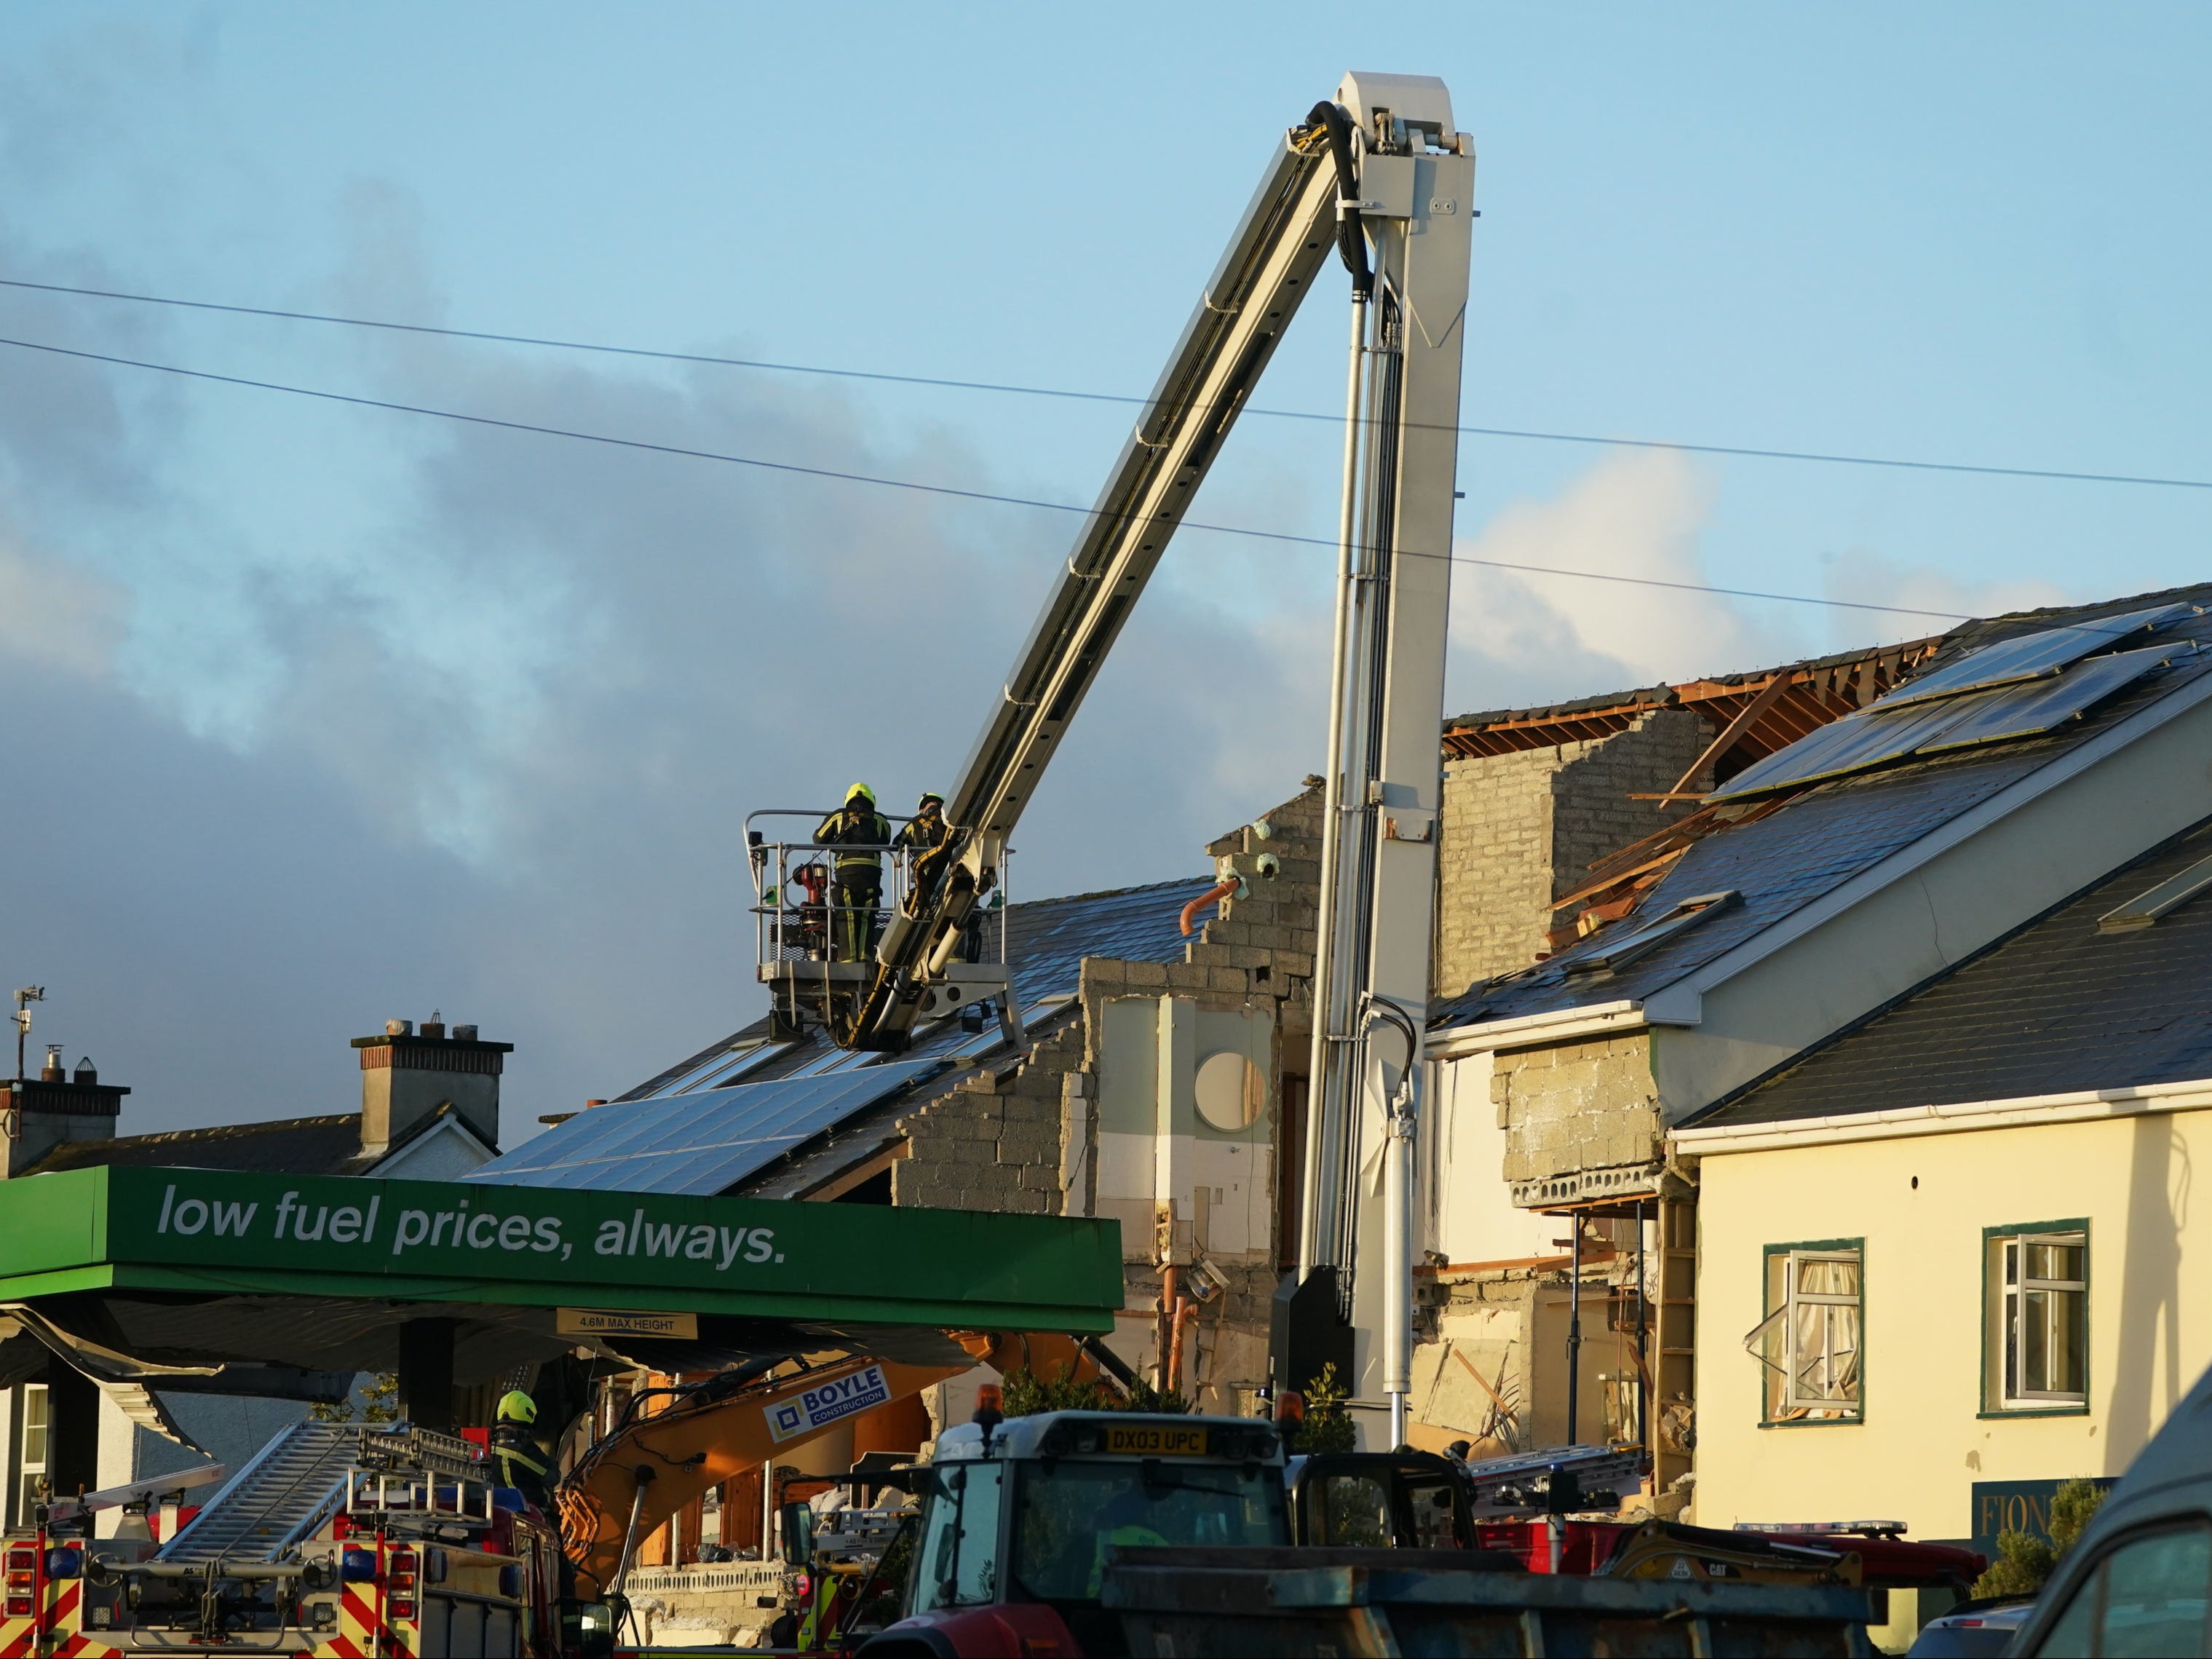 Police have updated the death toll for the explosion in County Donegal